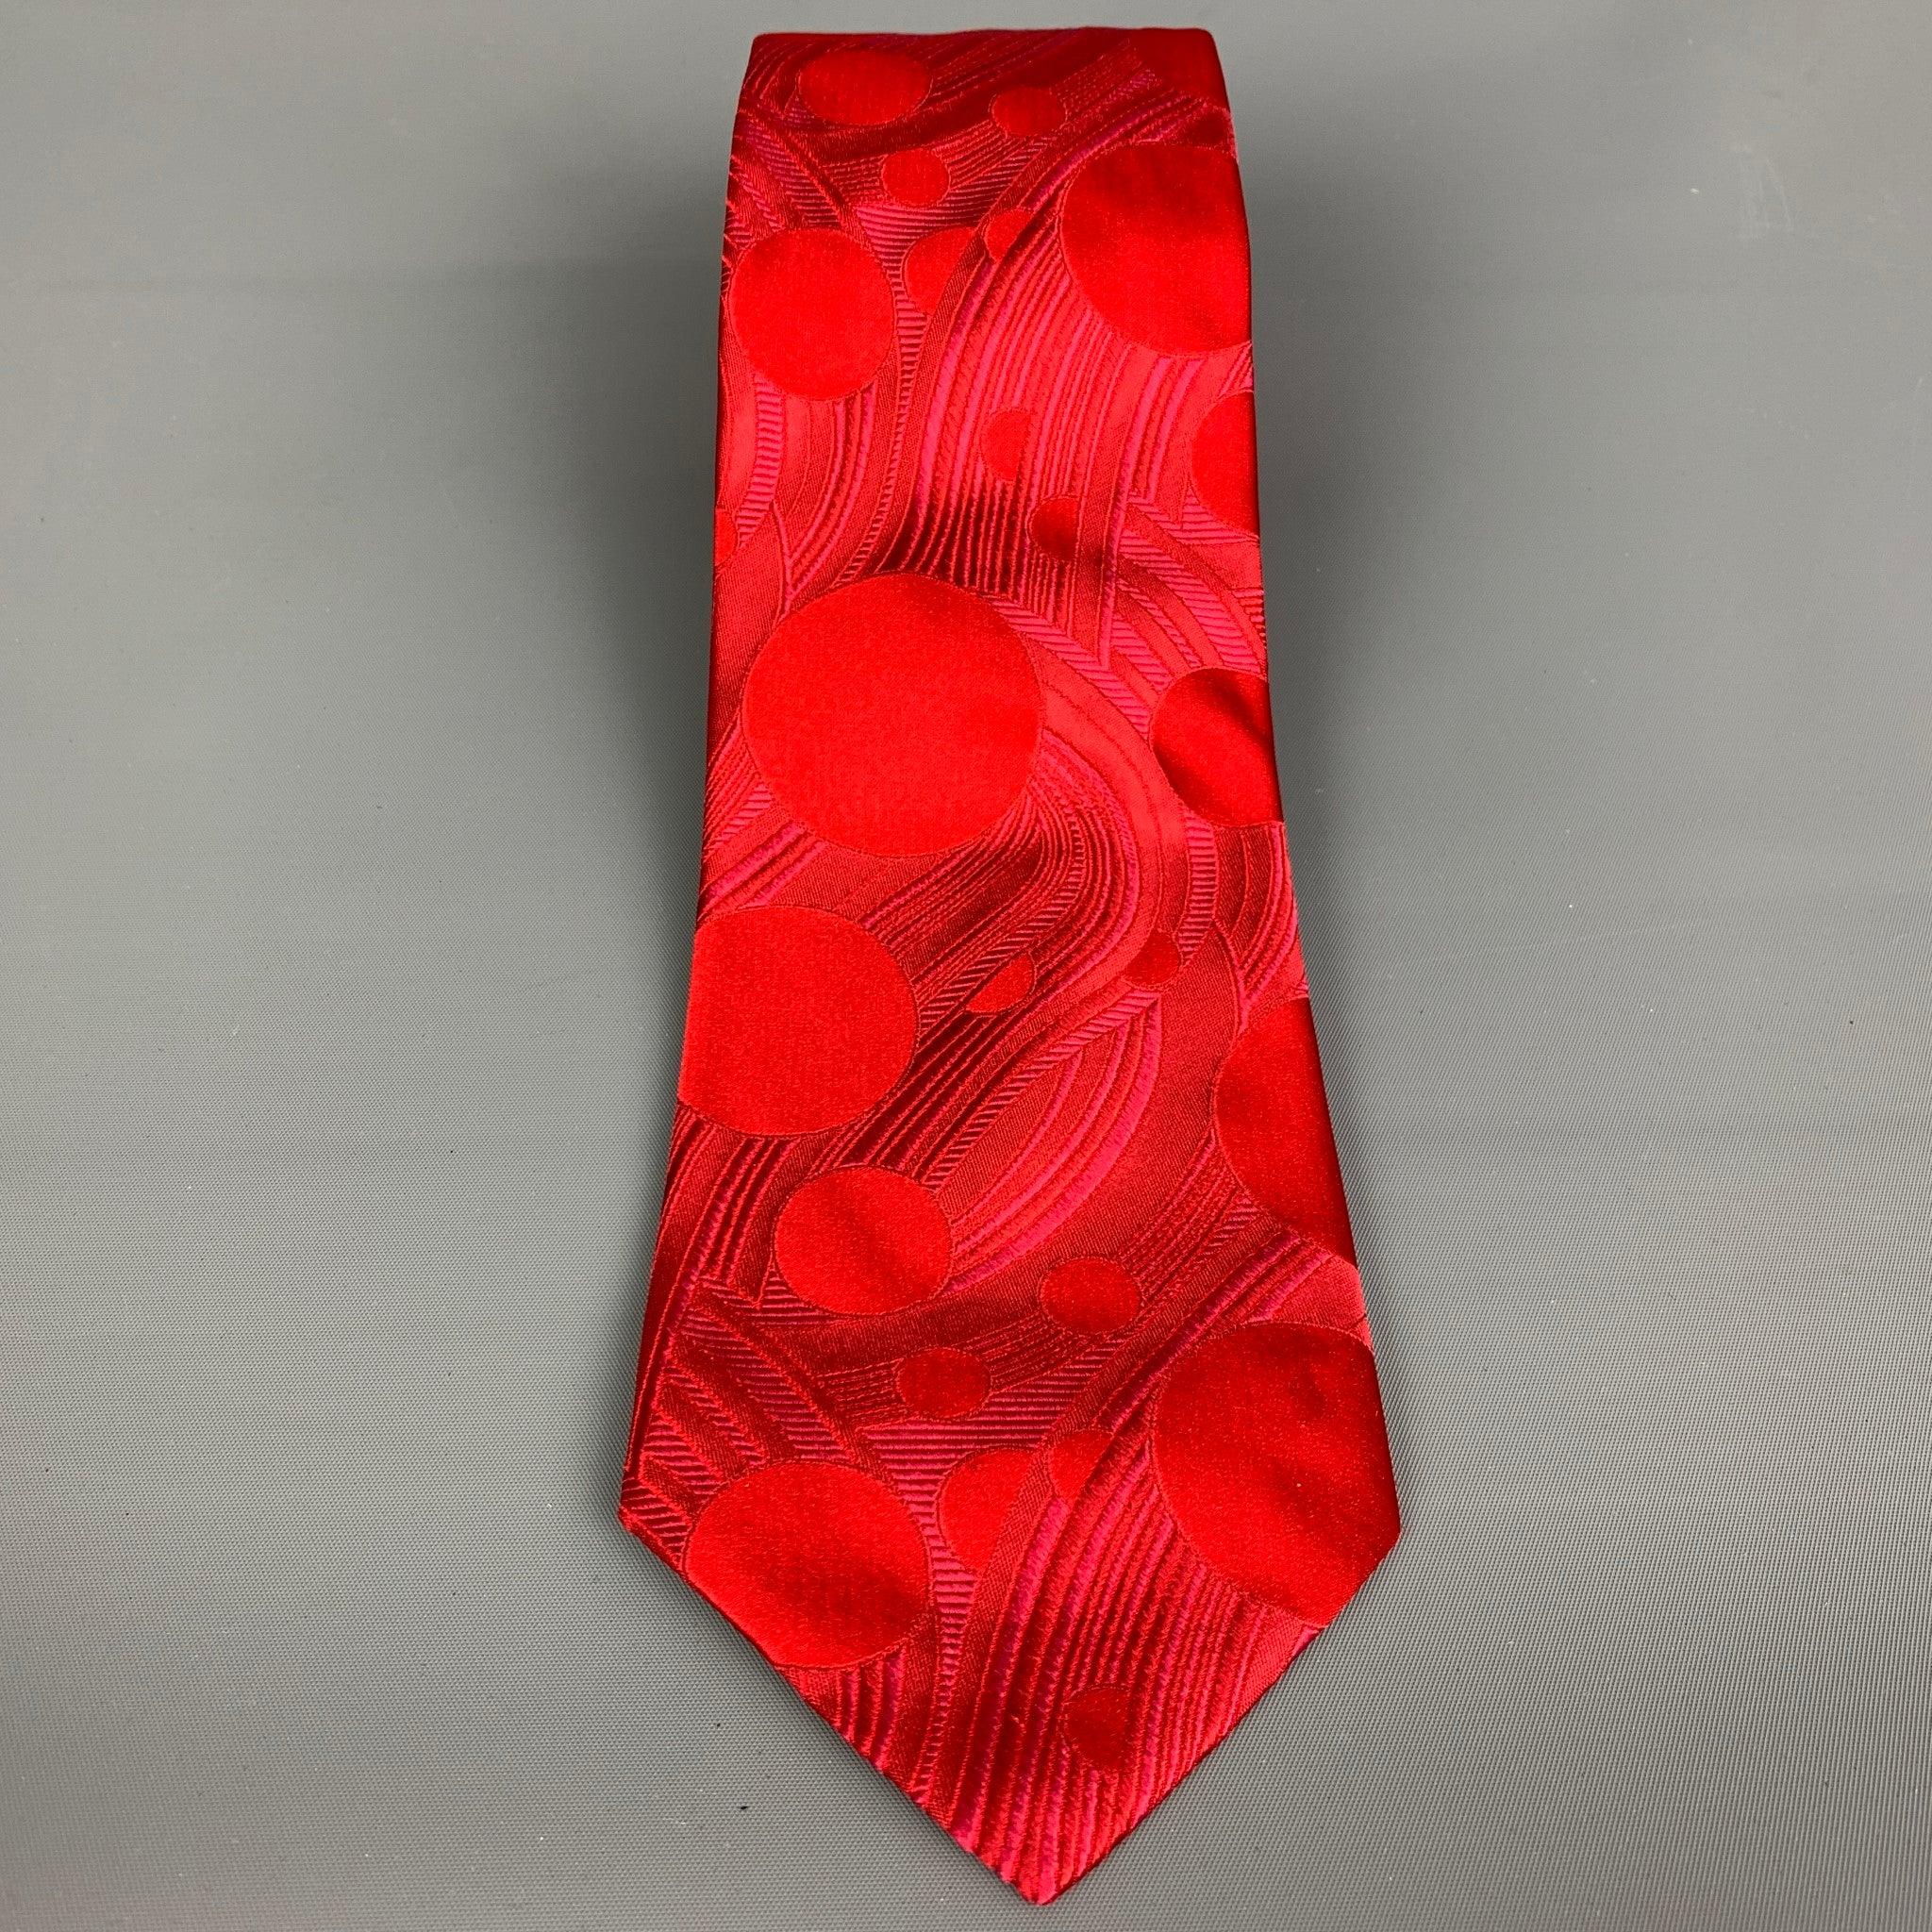 PAUL SMITH necktie comes in red abstract print silk jacquard. Made in Italy.Very Good Pre-Owned Condition. Minor marks.Width: 4 inches Length: 62 inches  

  
  
 
Reference: 103976
Category: Tie
More Details
    
Brand:  PAUL SMITH
Color: 